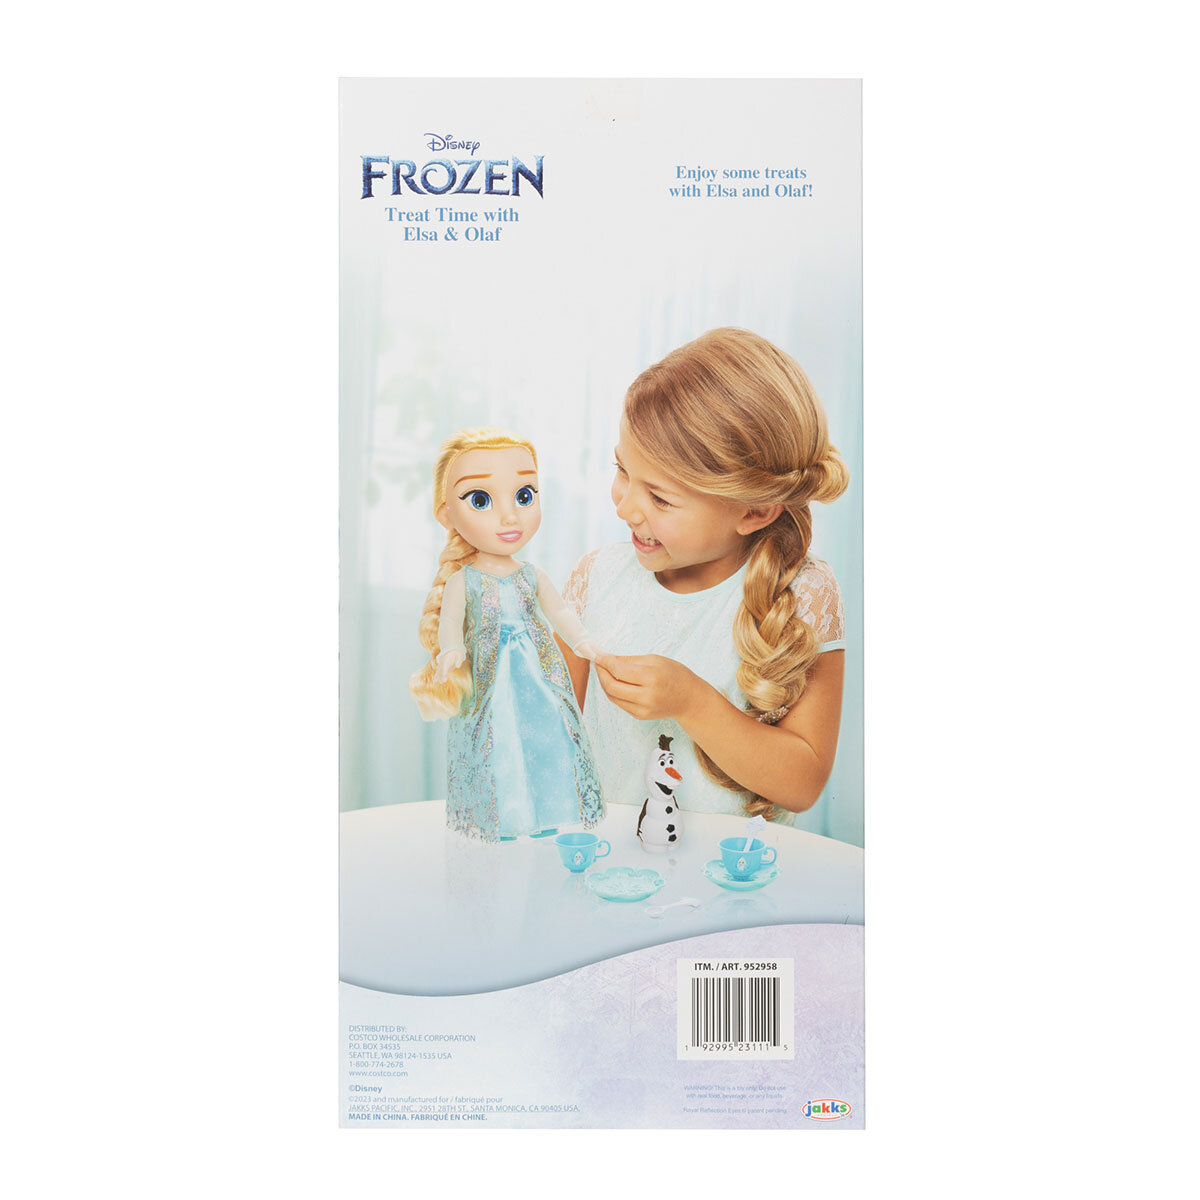 Buy Disney Tea Time Party Doll Elsa & Olaf Side Box Image at Costco.co.uk